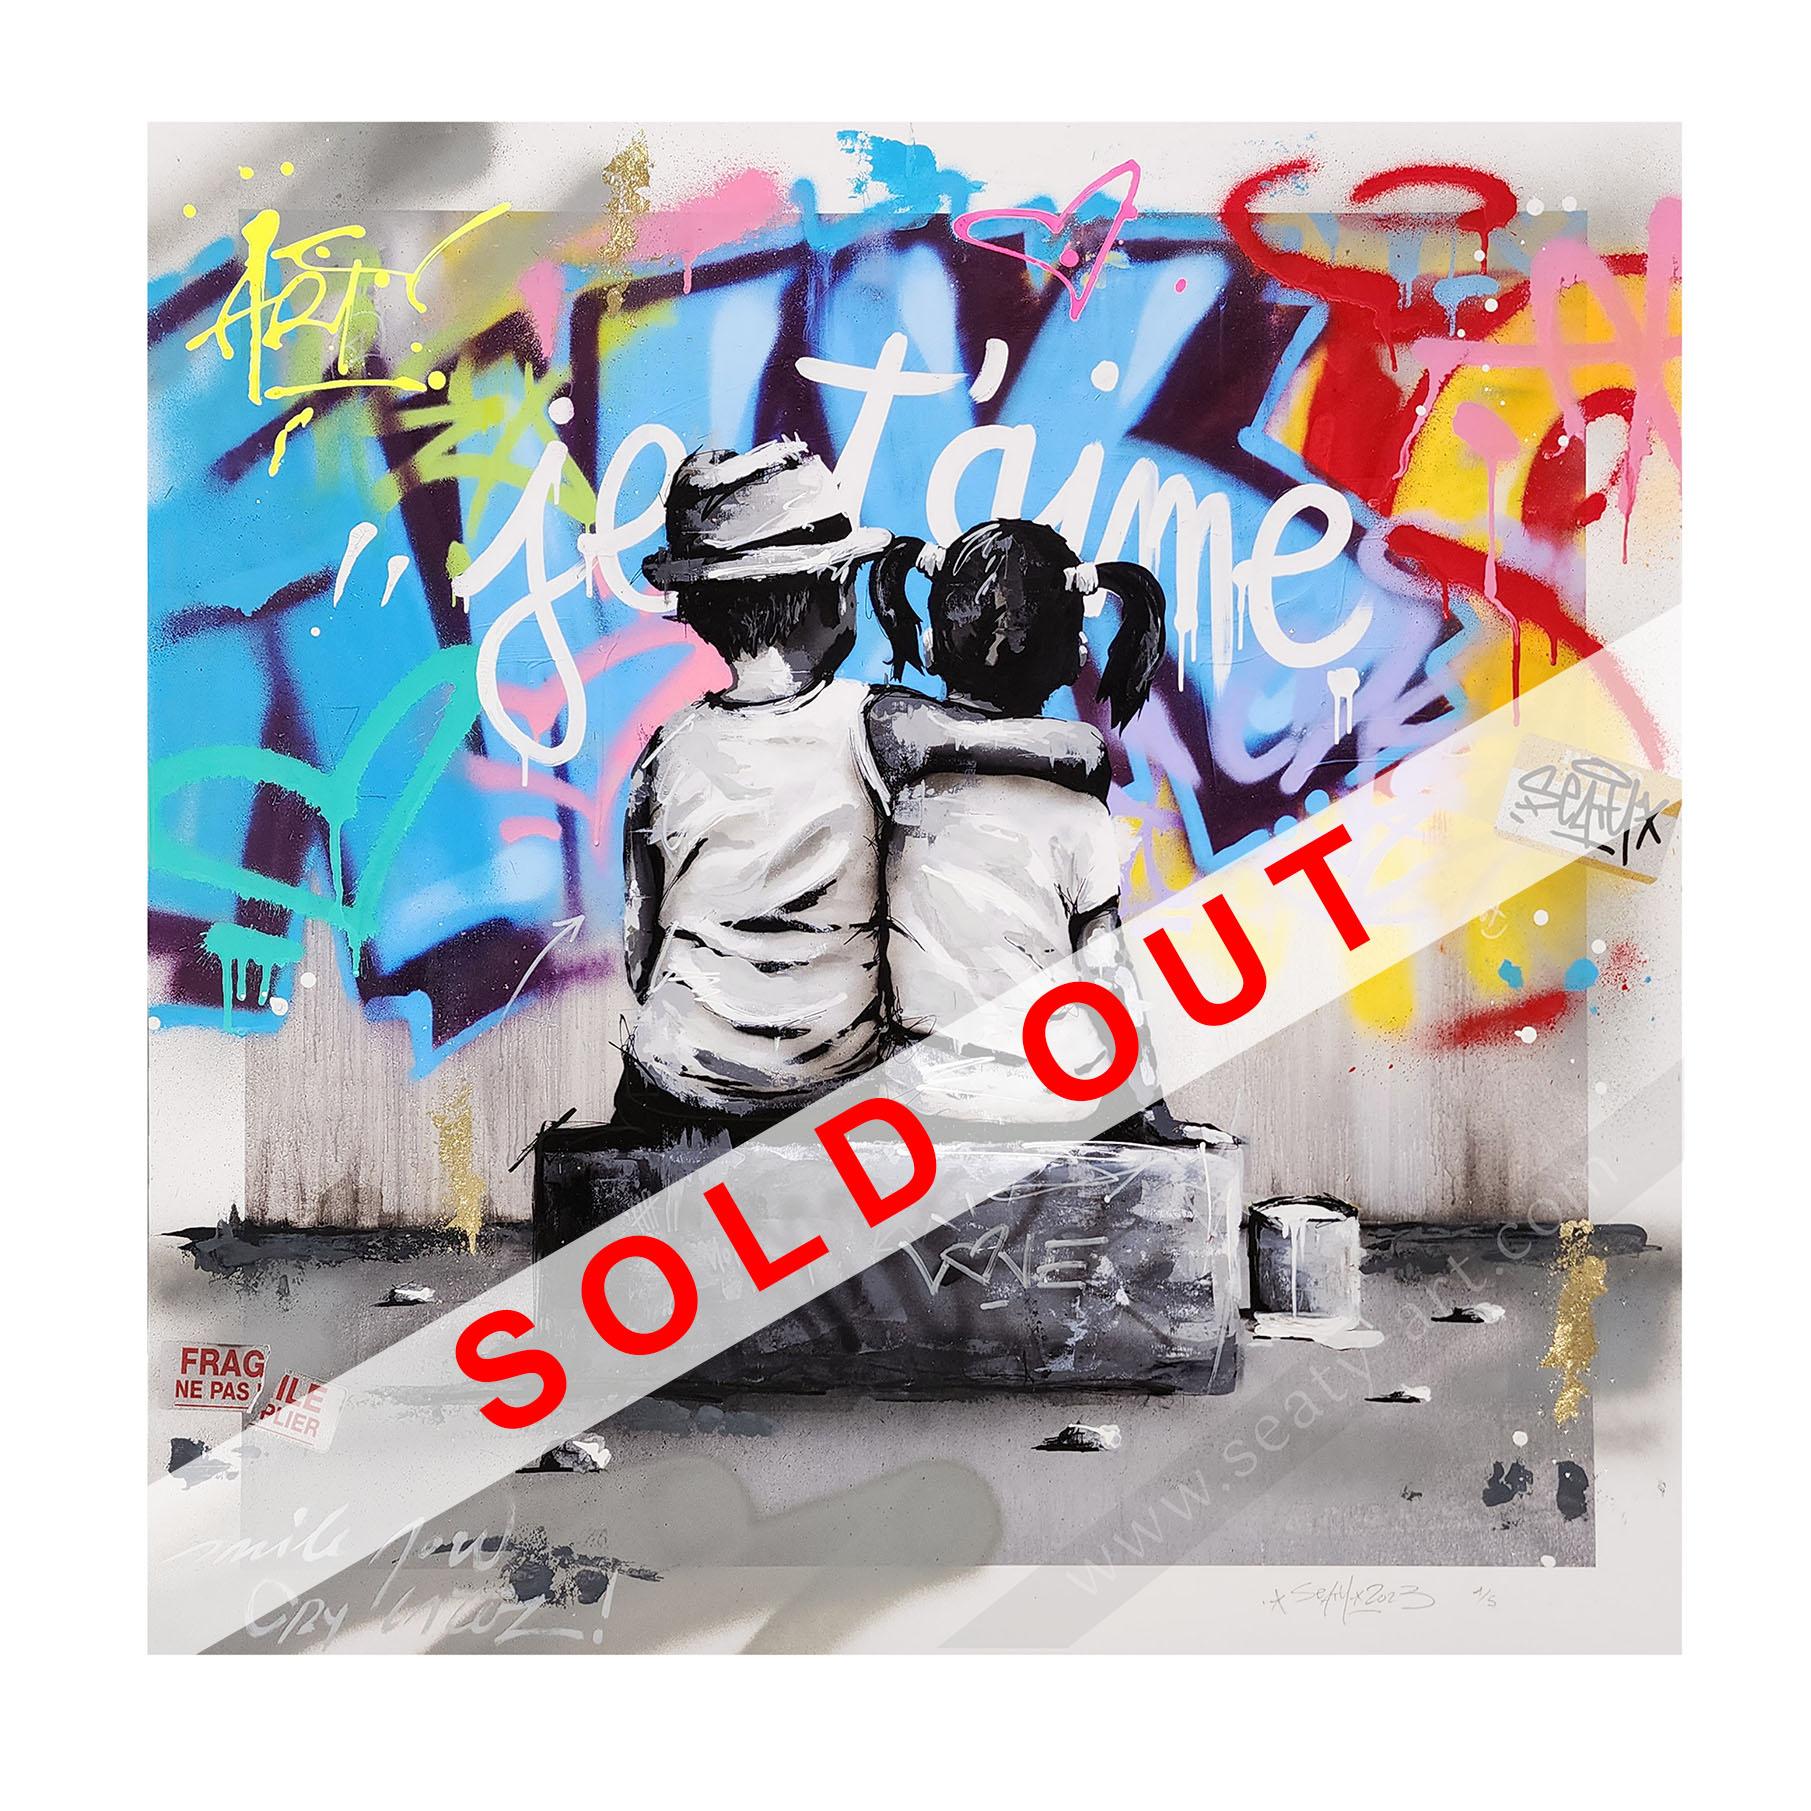 Sold out site 19